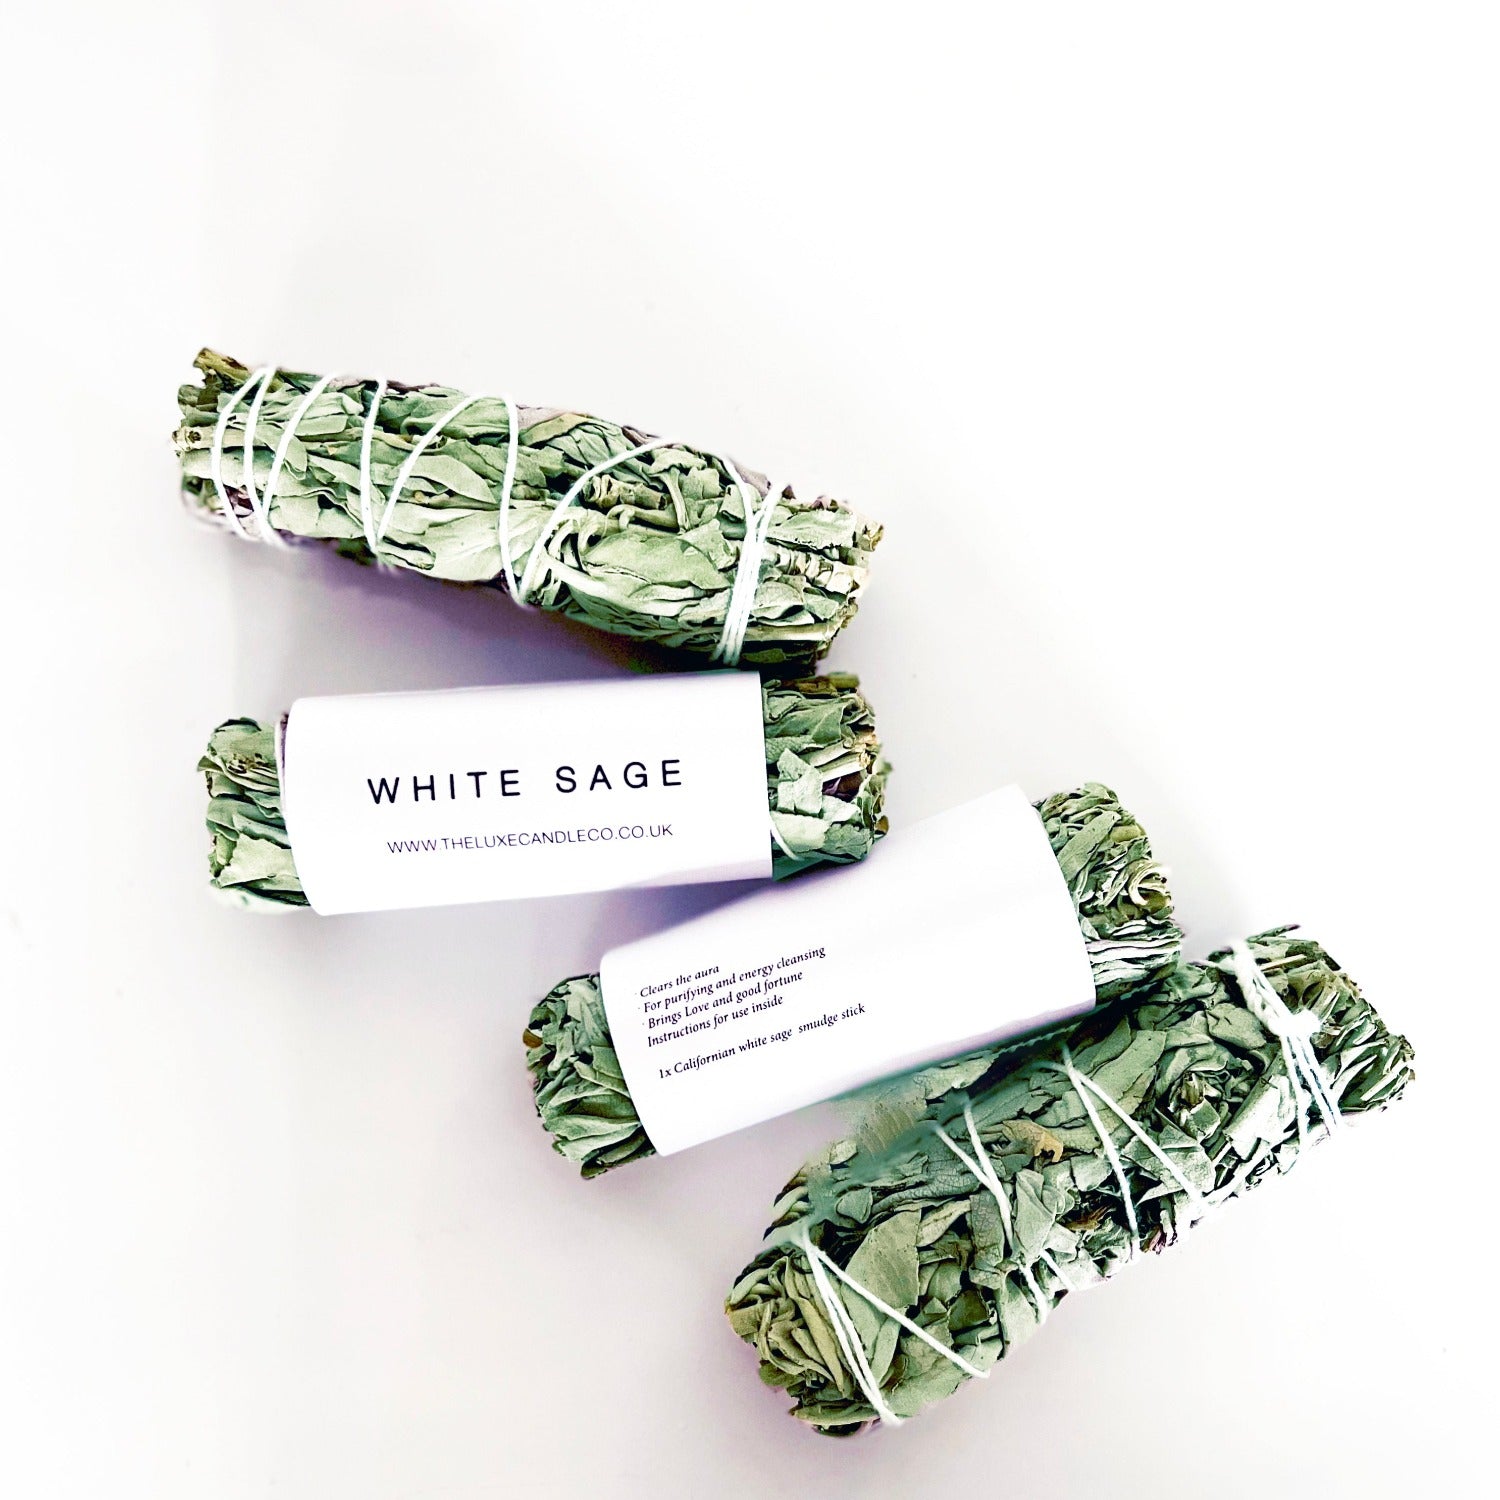 Sage smudge sticks UK - Instructions on how to use sage to cleanse home - The Luxe Candle Co Wellness + Self Care Collection